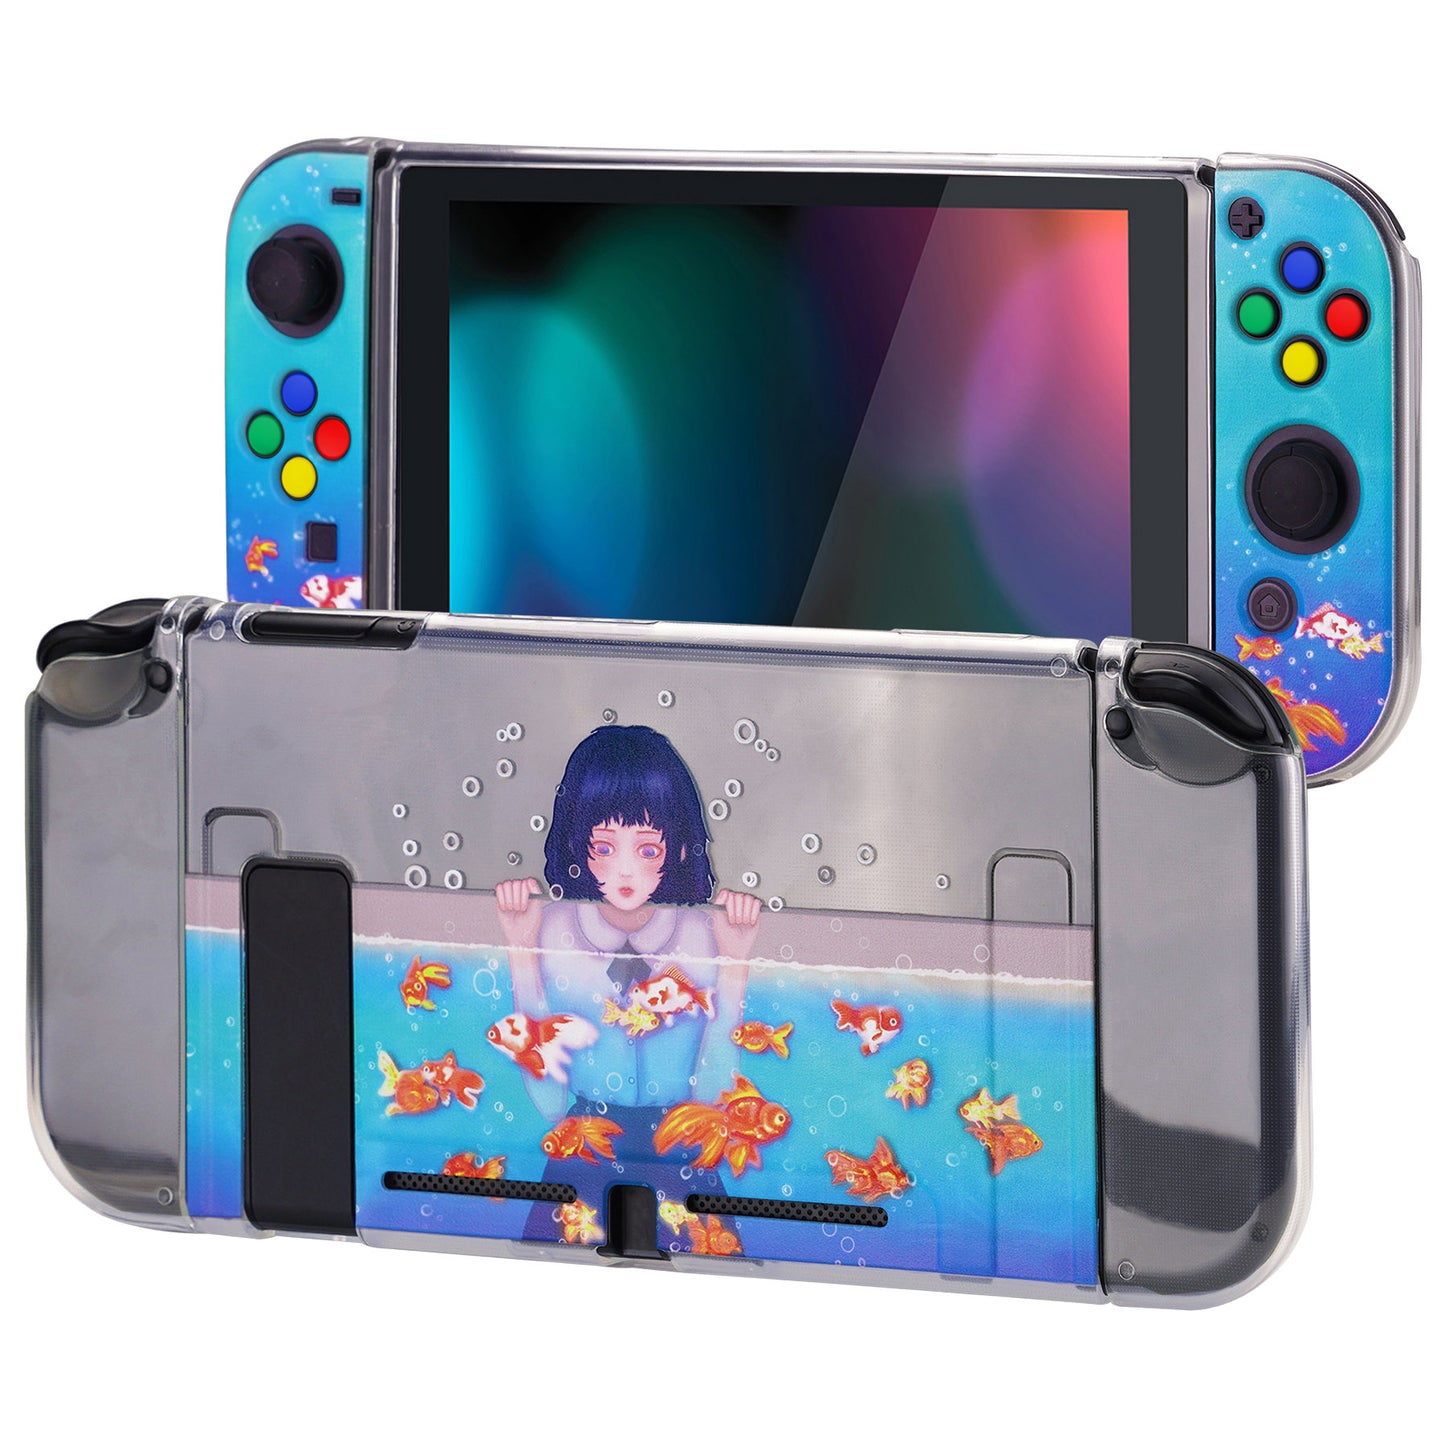 PlayVital Transparent Protective Case for NS Switch, Soft TPU Slim Case Cover for NS Switch Console with Colorful ABXY Direction Button Caps - Aquarium Girl - NTU6029